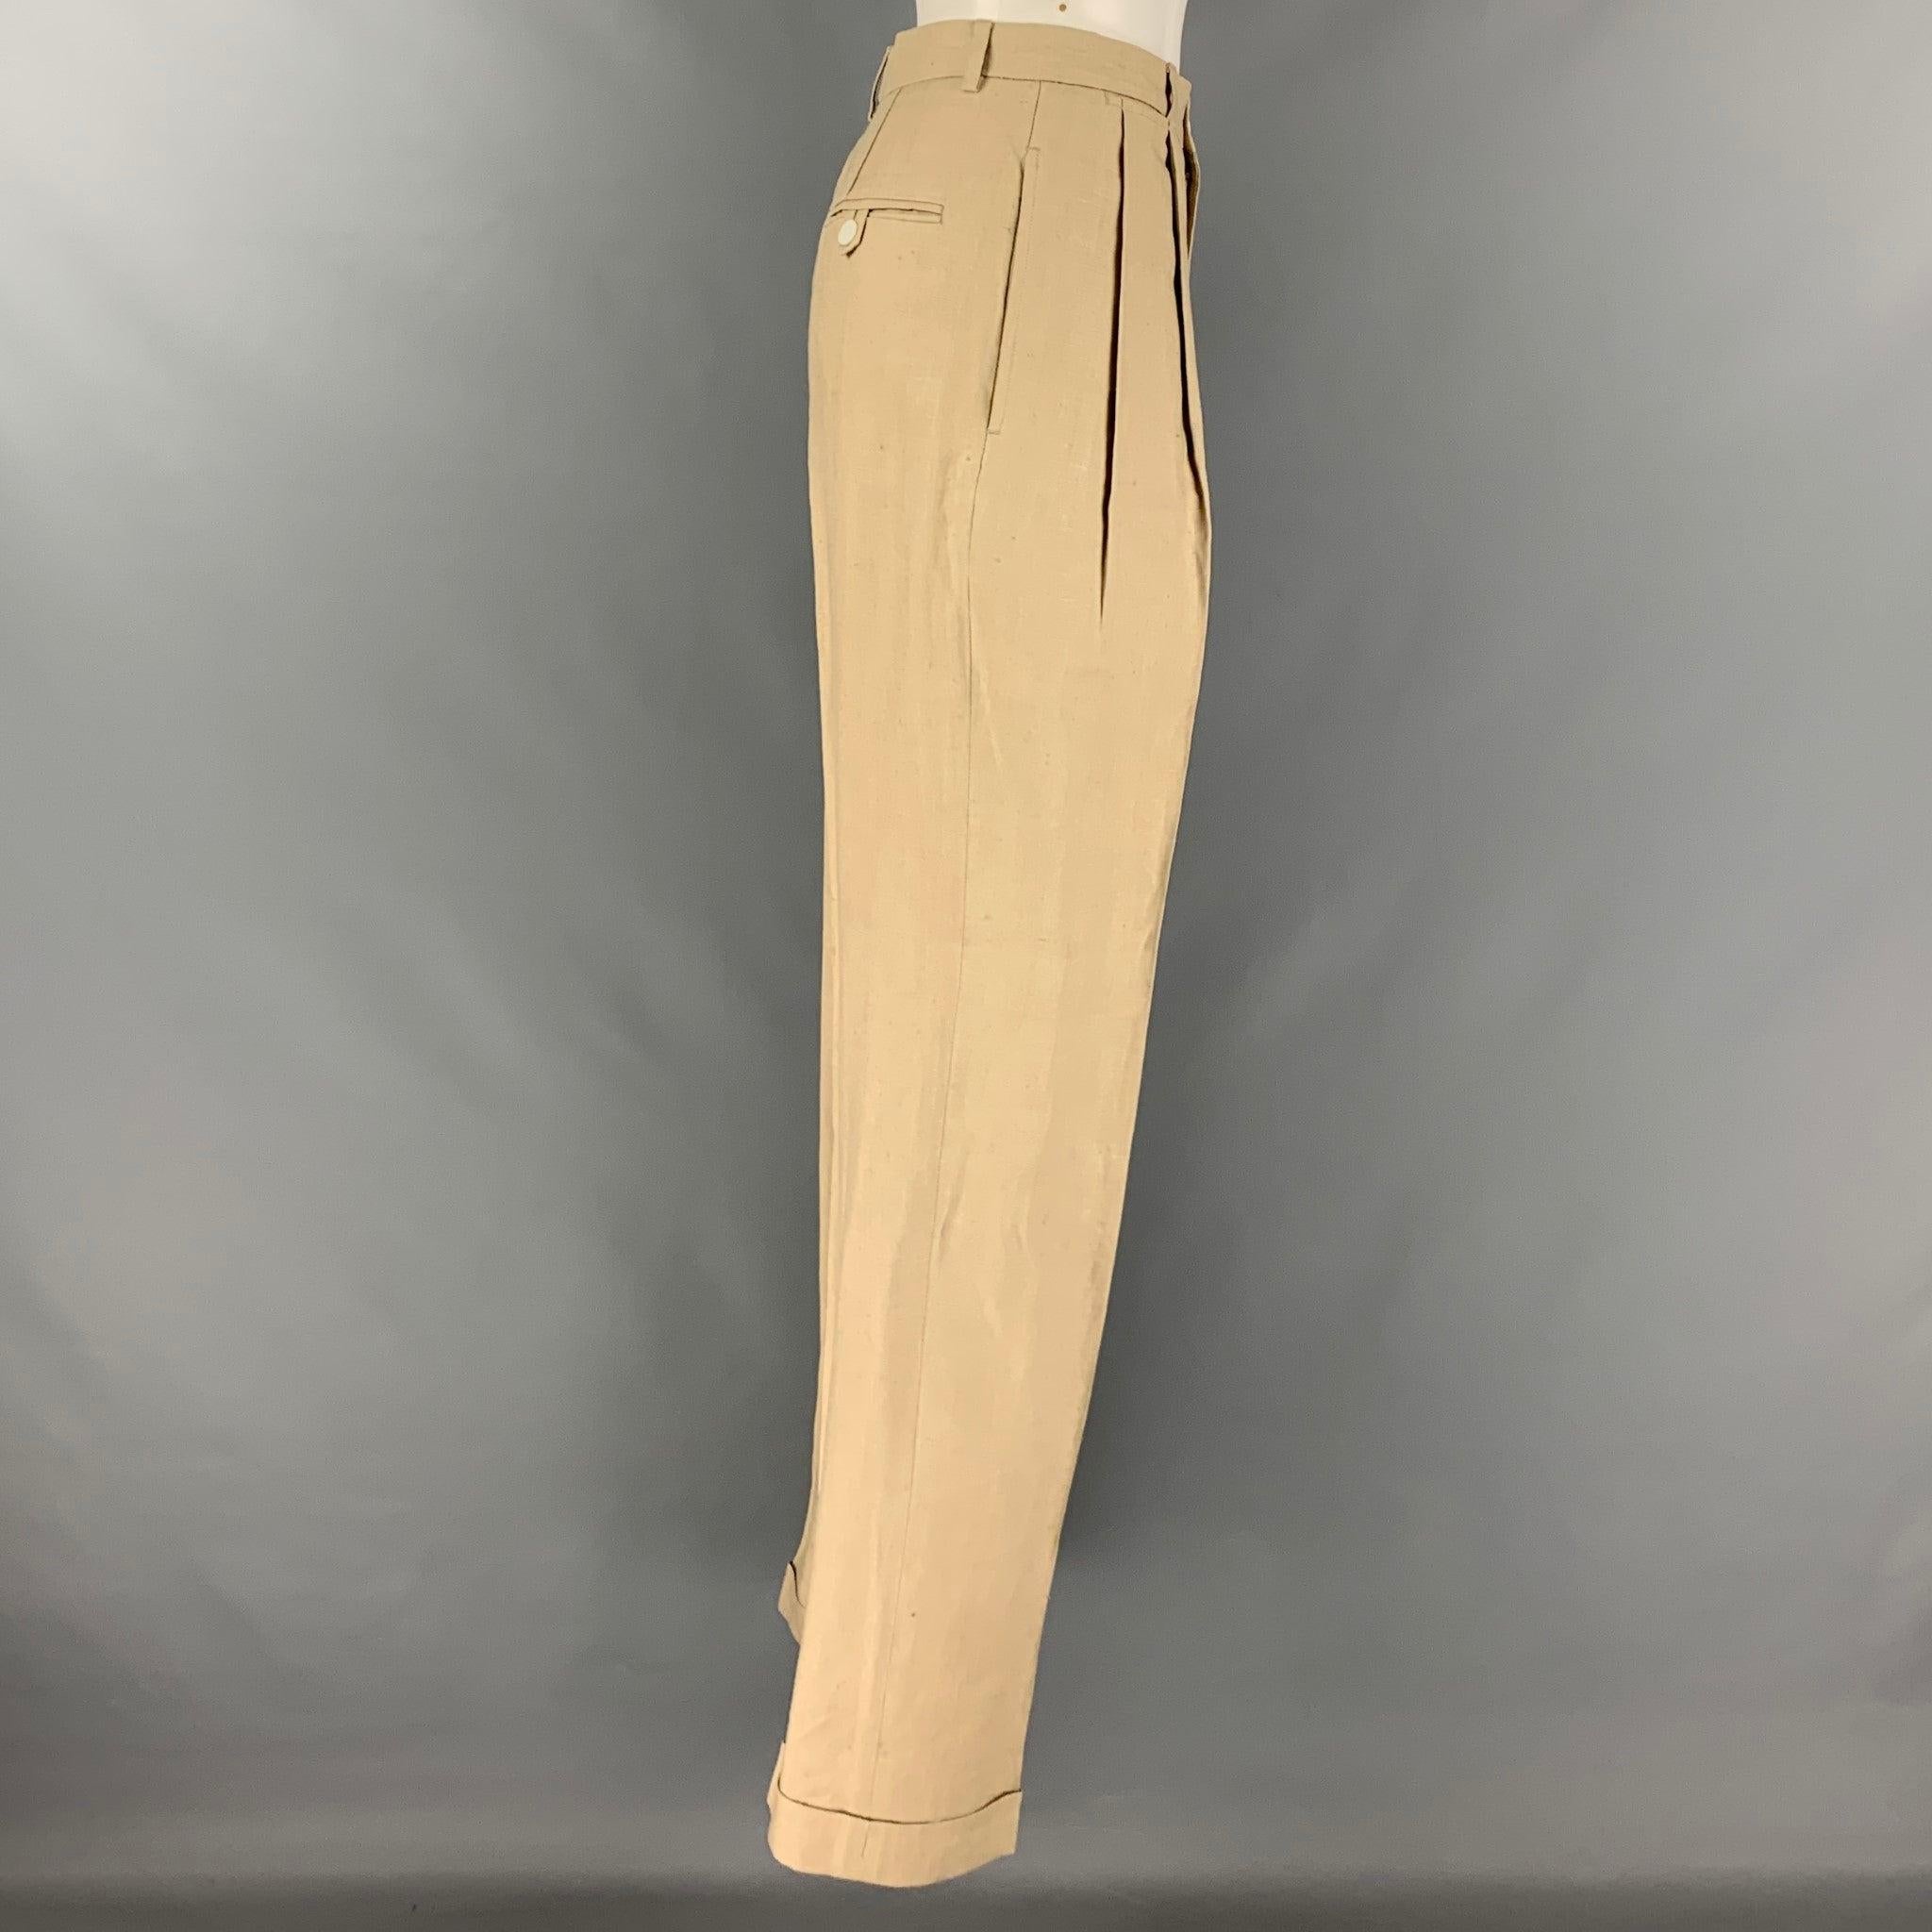 RALPH LAUREN BLUE LABEL dress pants comes in a beige and taupe linen woven material featuring a high waist, cuffed leg, pleated front, and a button fly closure. Made in Italy.Very Good Pre-Owned Condition. Moderate signs of wear. 

Marked:  6